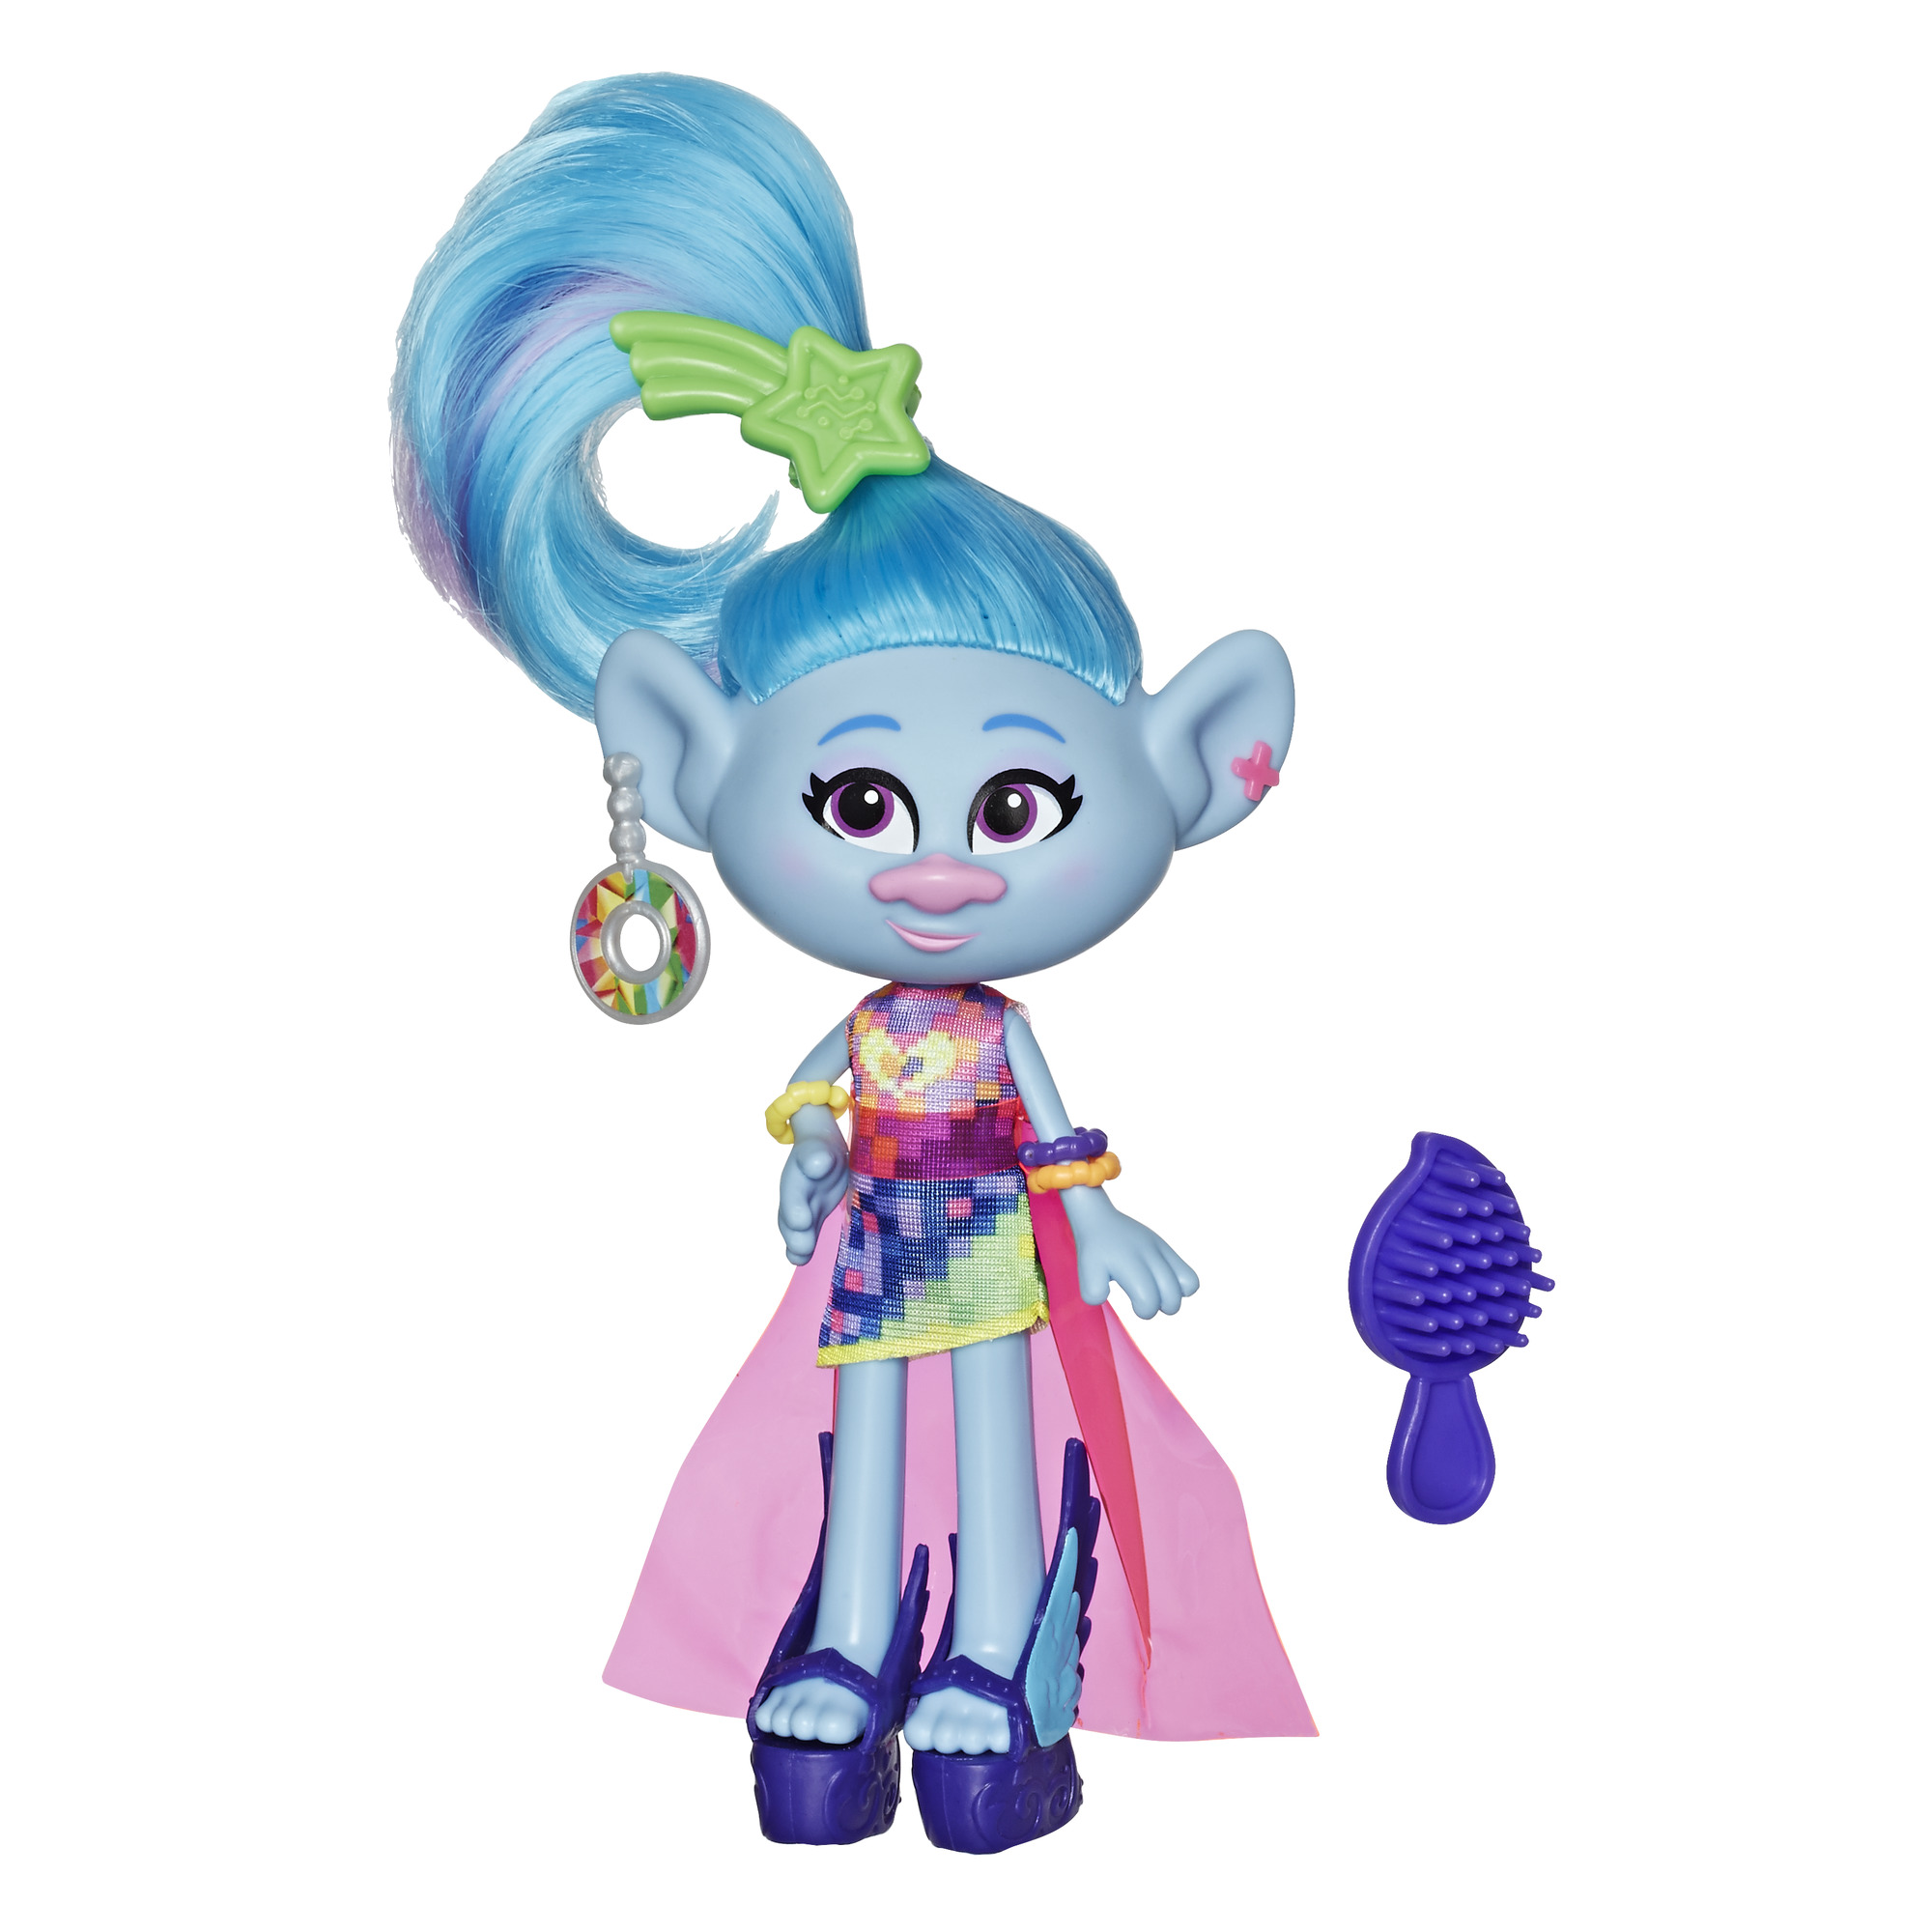 DreamWorks Trolls Glam Chenille Fashion Doll, Includes Dress and Shoes - image 1 of 11